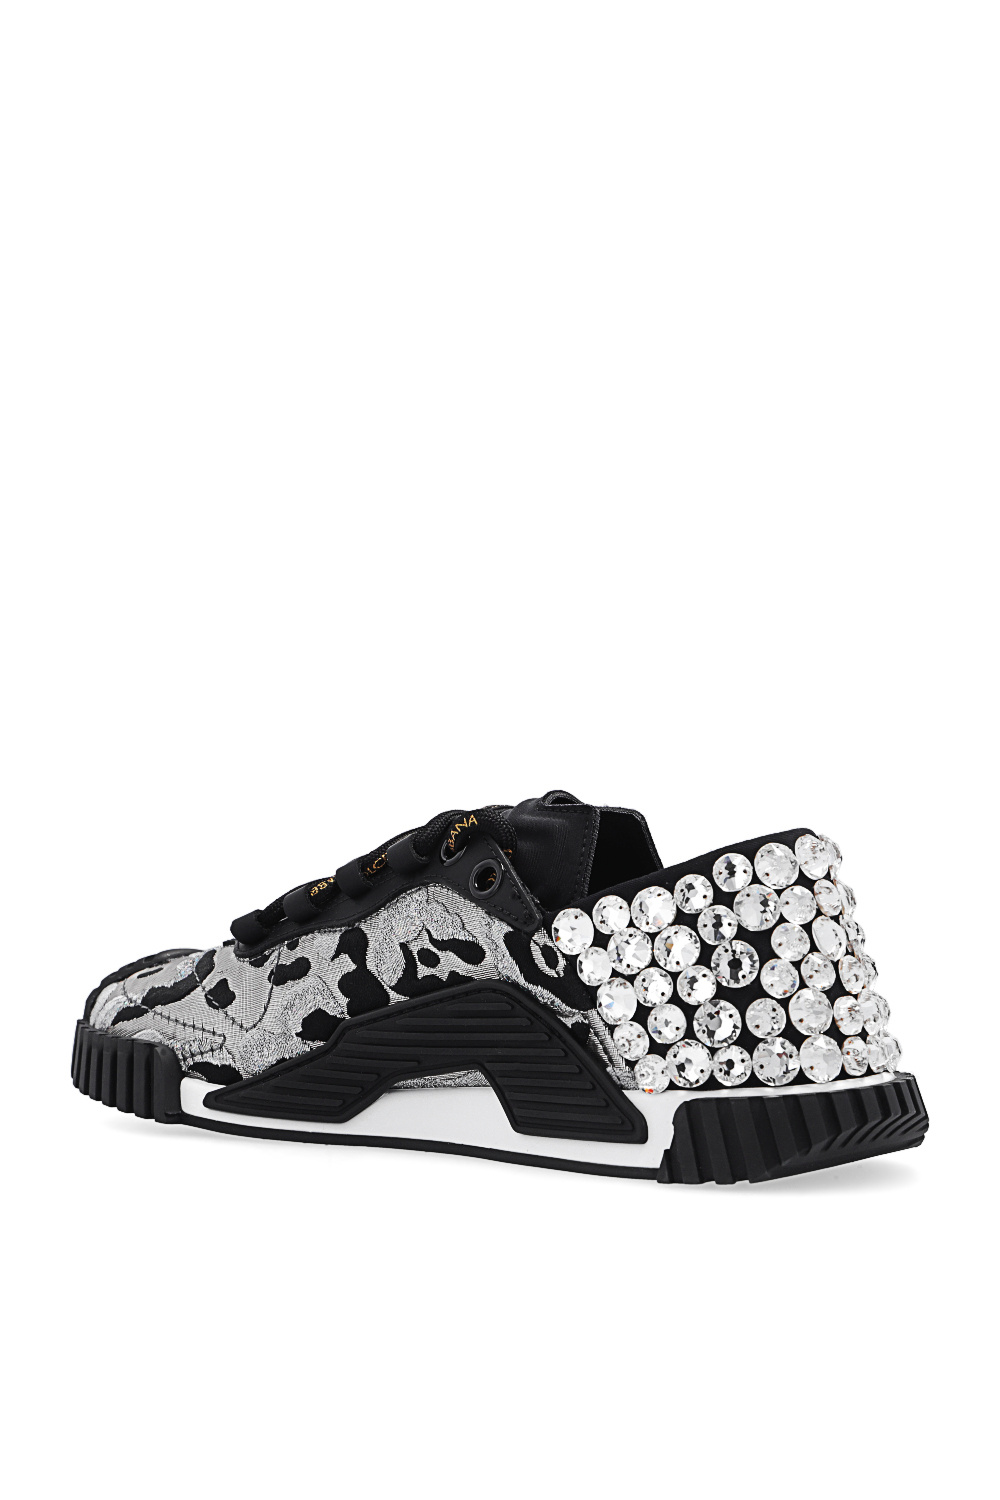 dolce & gabbana leather bag ‘NS1’ sneakers